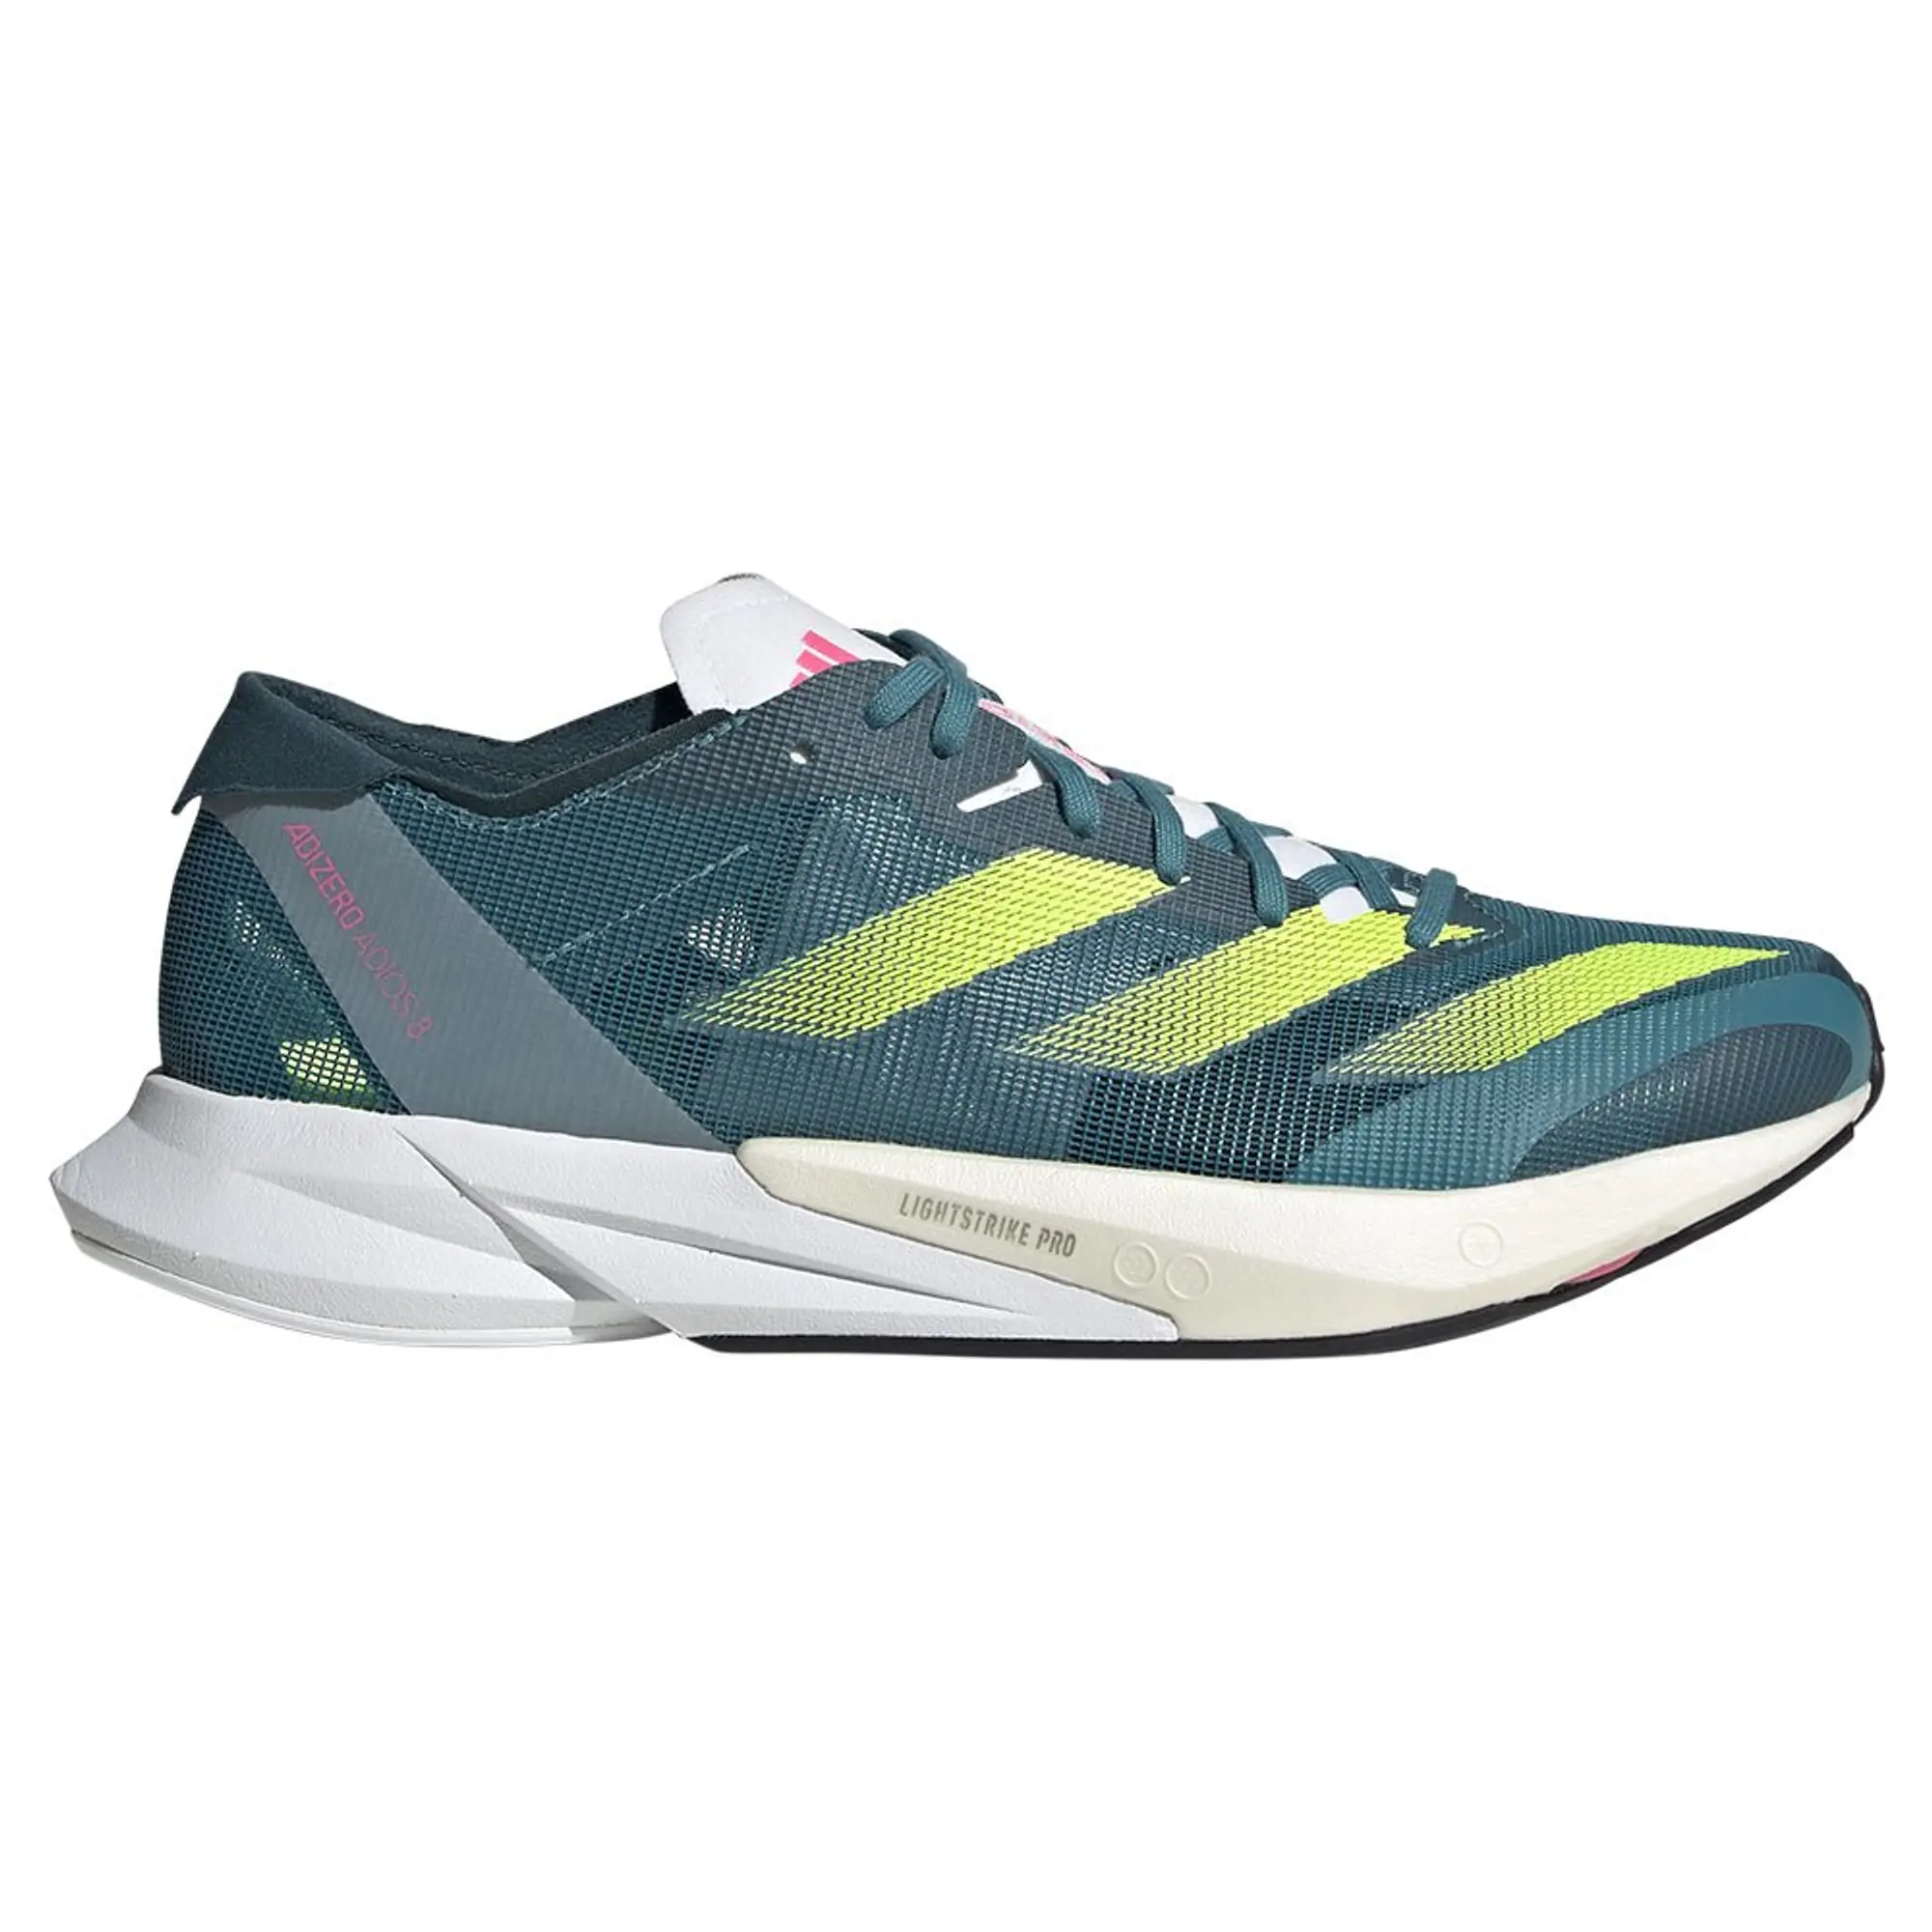 adidas Adizero Adios 8 Competition Running Shoe Women - Red, Lime